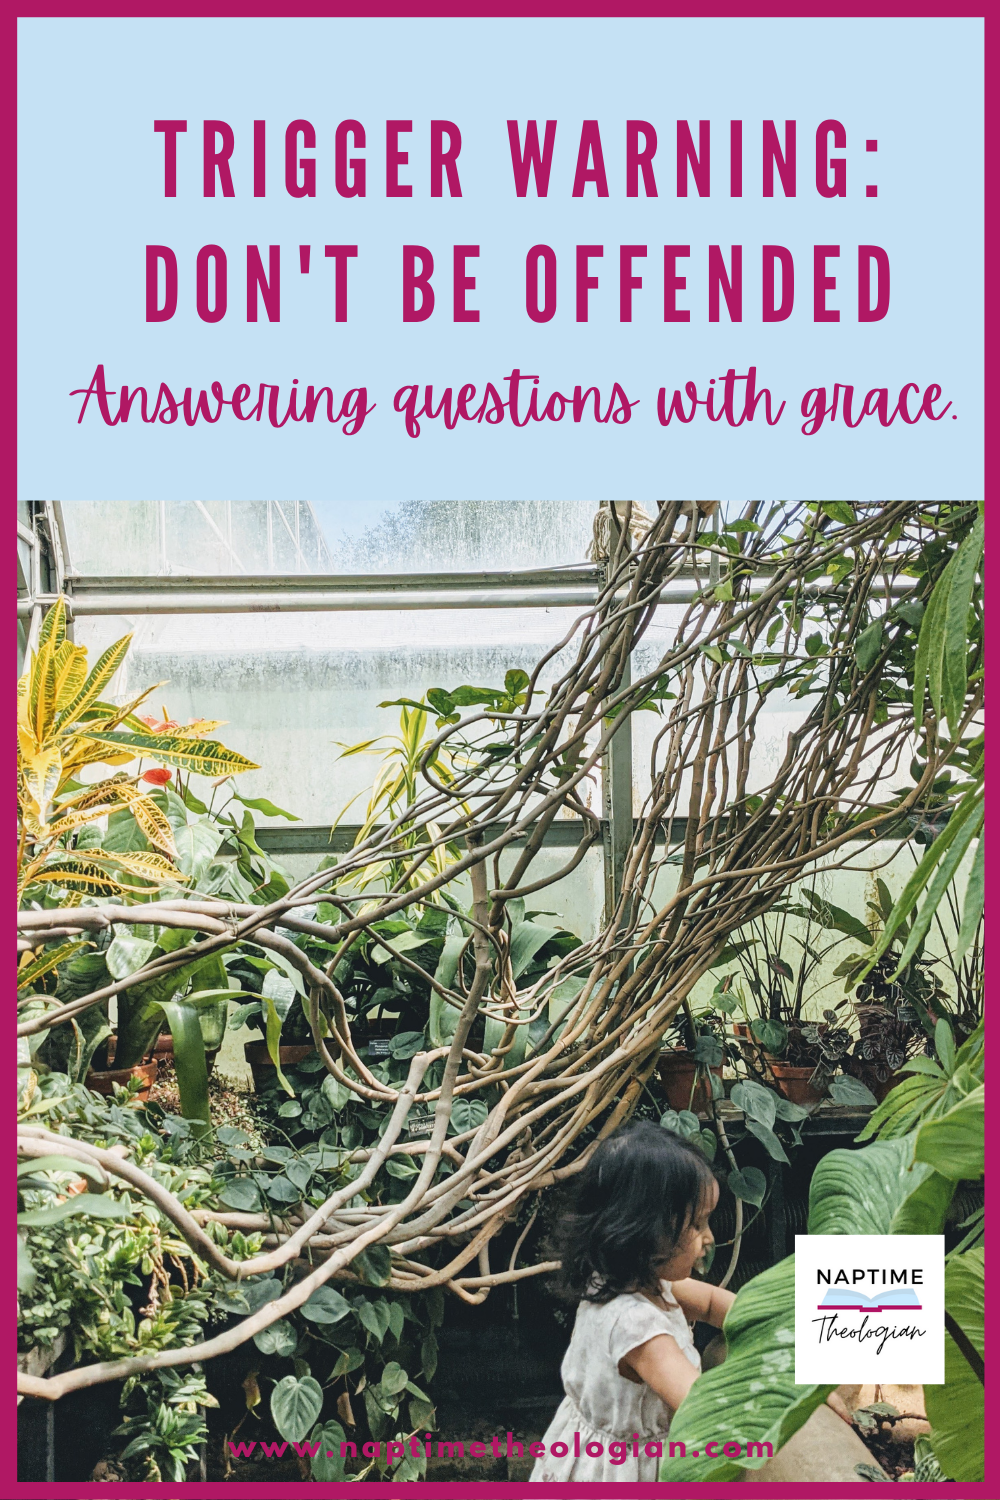 Don’t be offended.